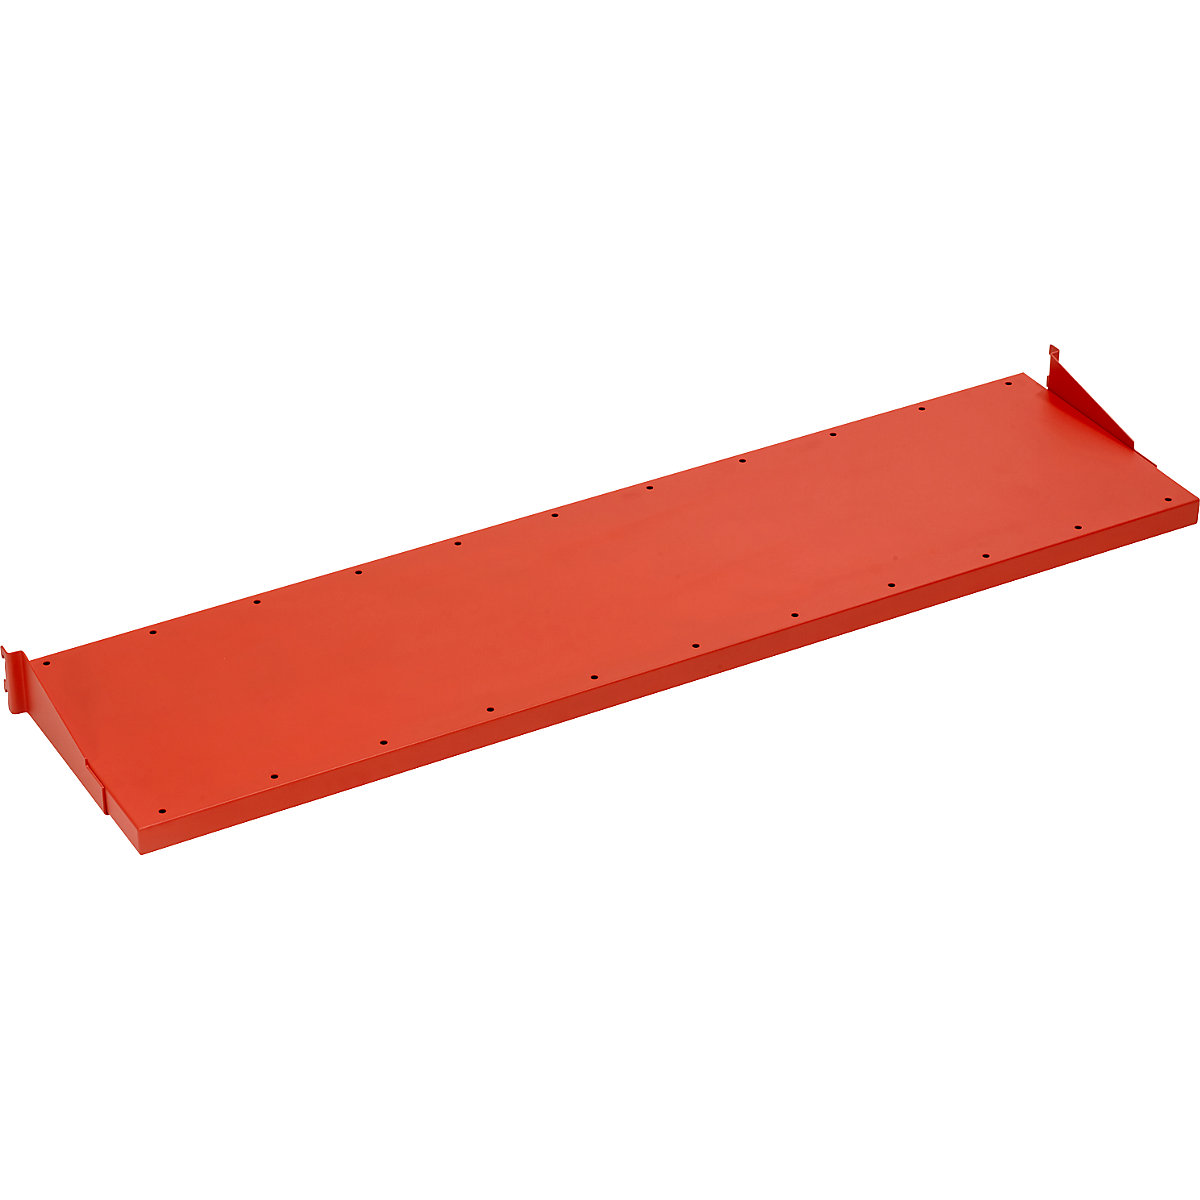 Cardboard box shelf, for securing to add-on rails, for table width 1600 mm, 7 shelf dividers-3